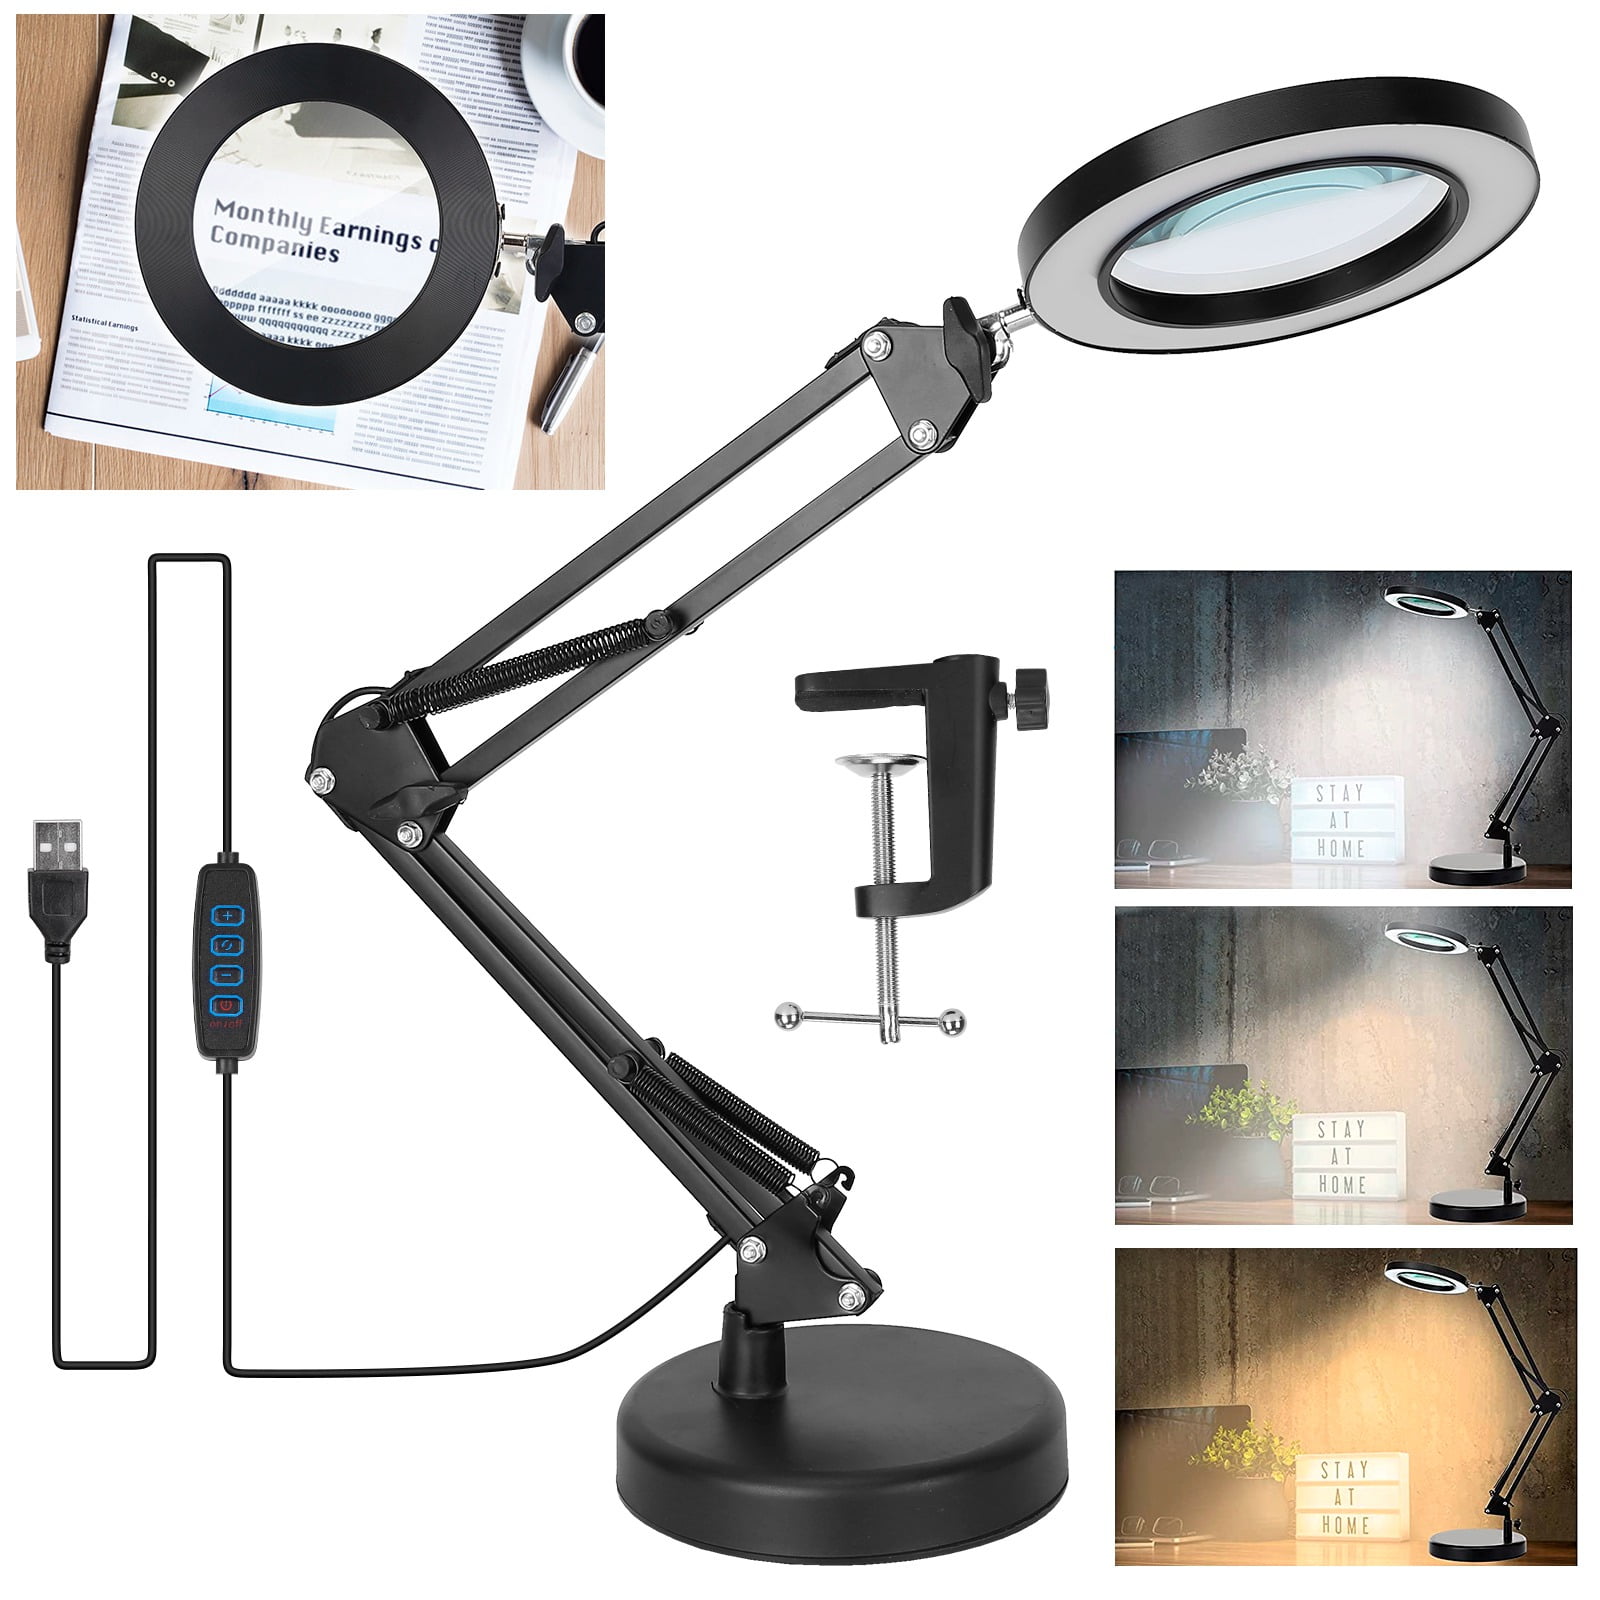 iMountek 2-in-1 LED Magnifier Desk Lamp 8x Magnifying Glass Light Swing Arm Desk Table Light USB Reading Lamp with Clamp Stand 10 Brightness 3 Modes Walmart.com